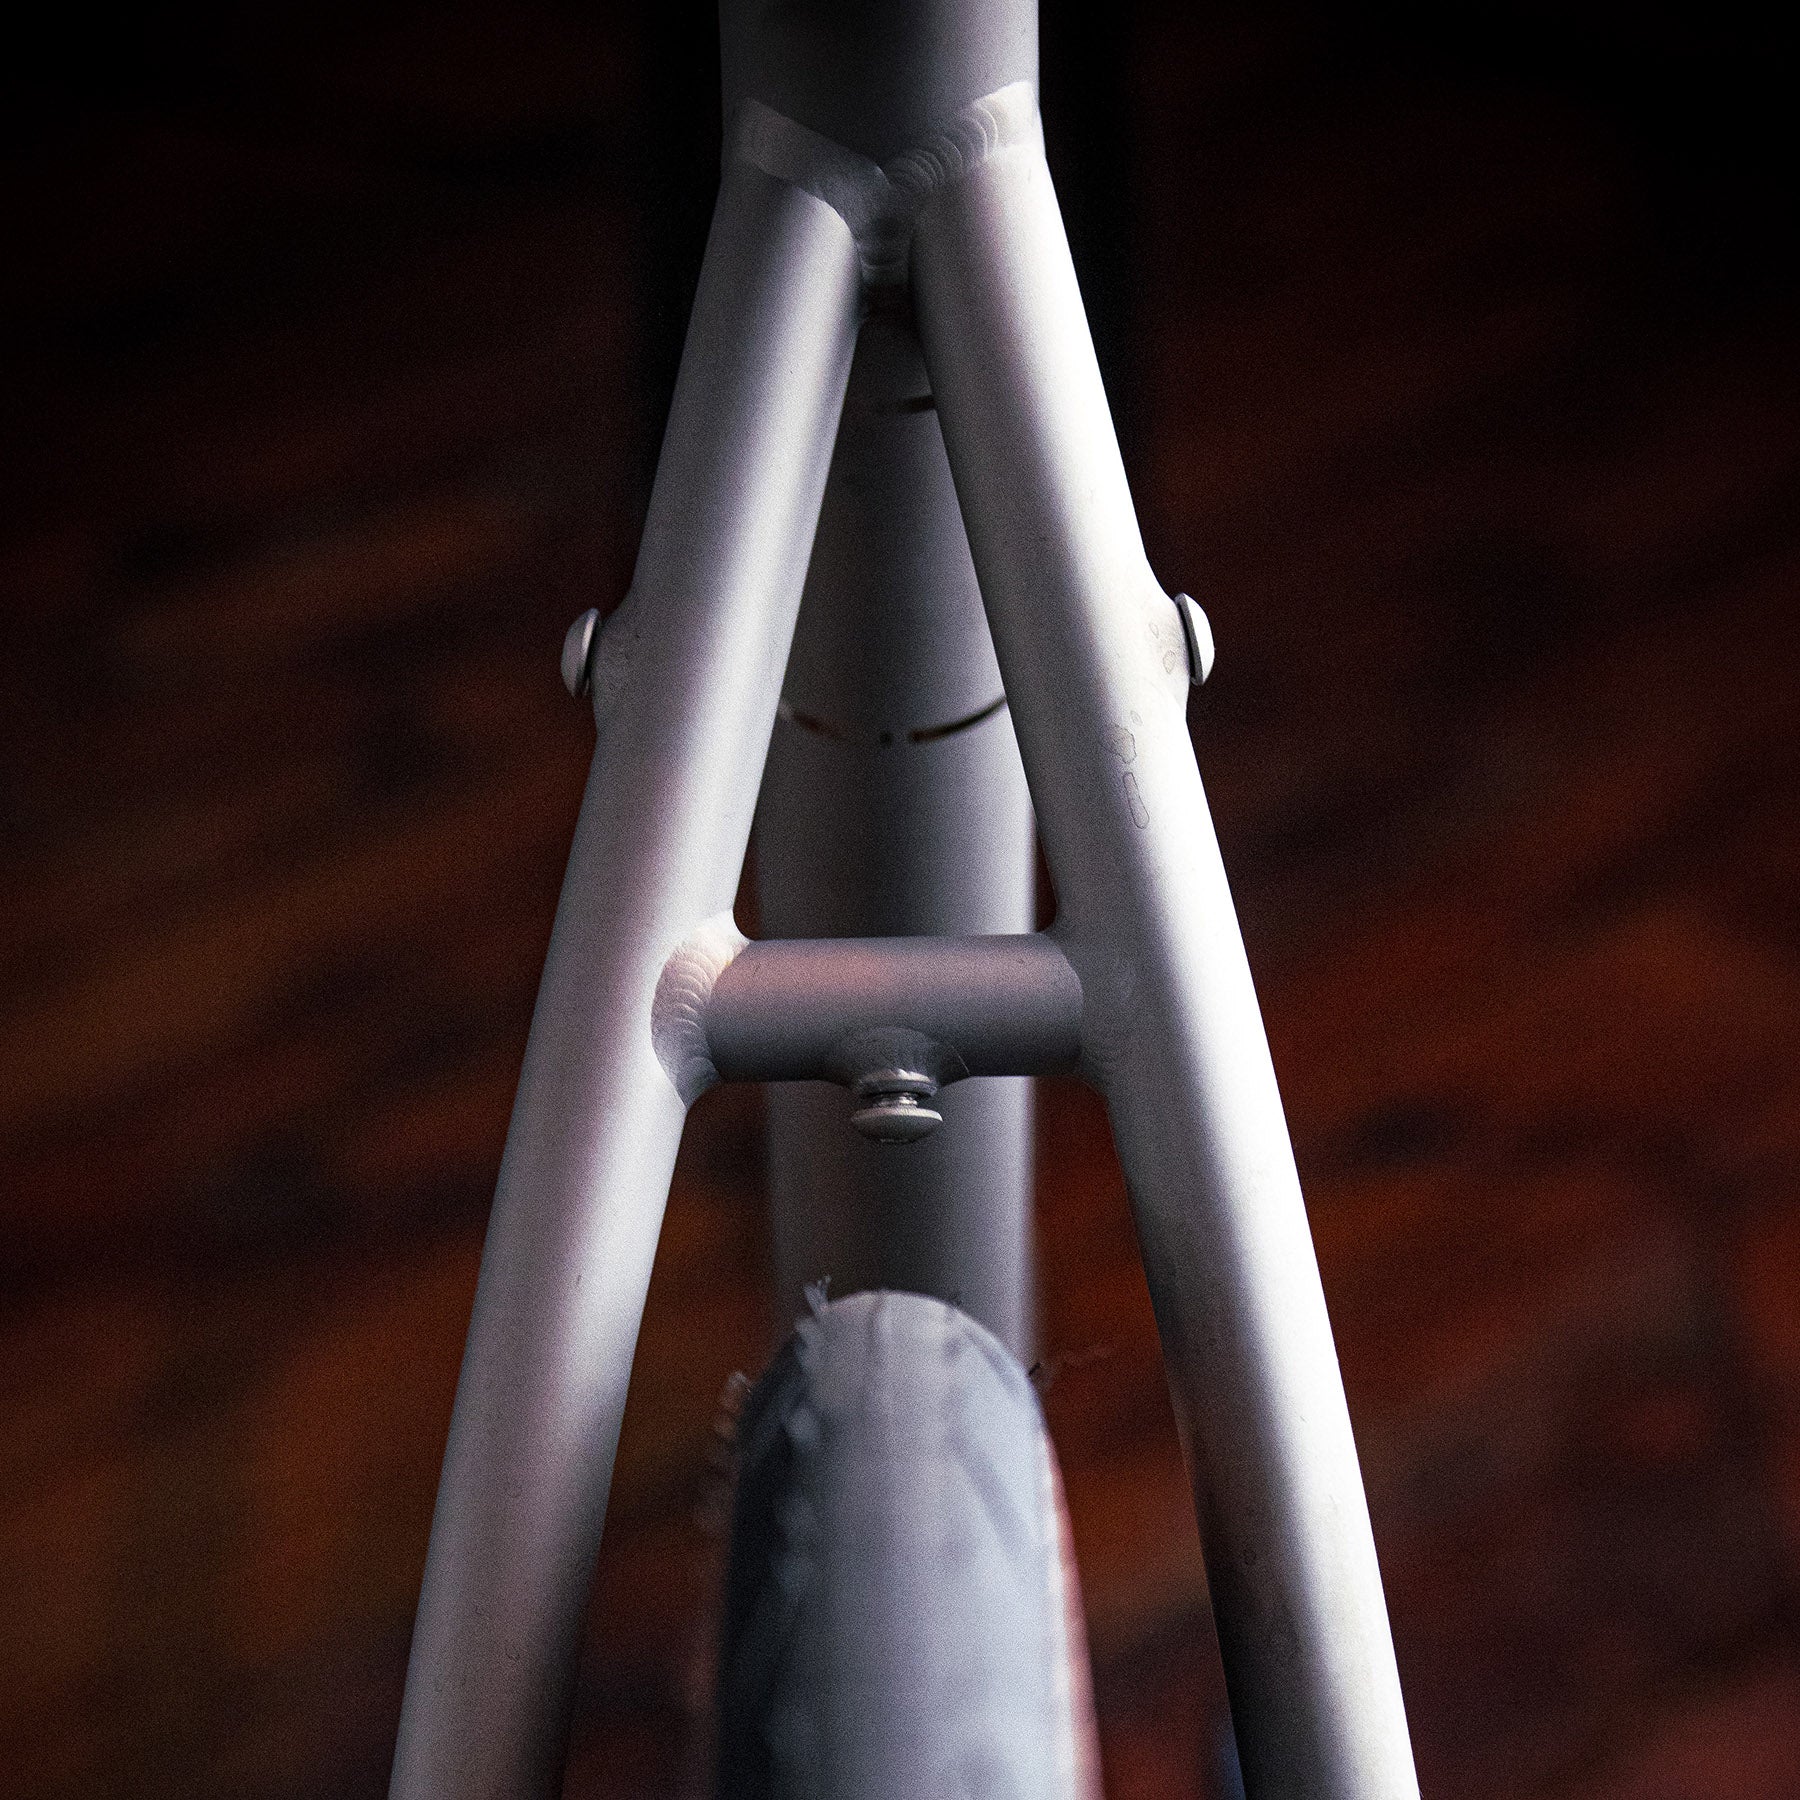 Hero image featuring the frame of the BSC Ti road bike